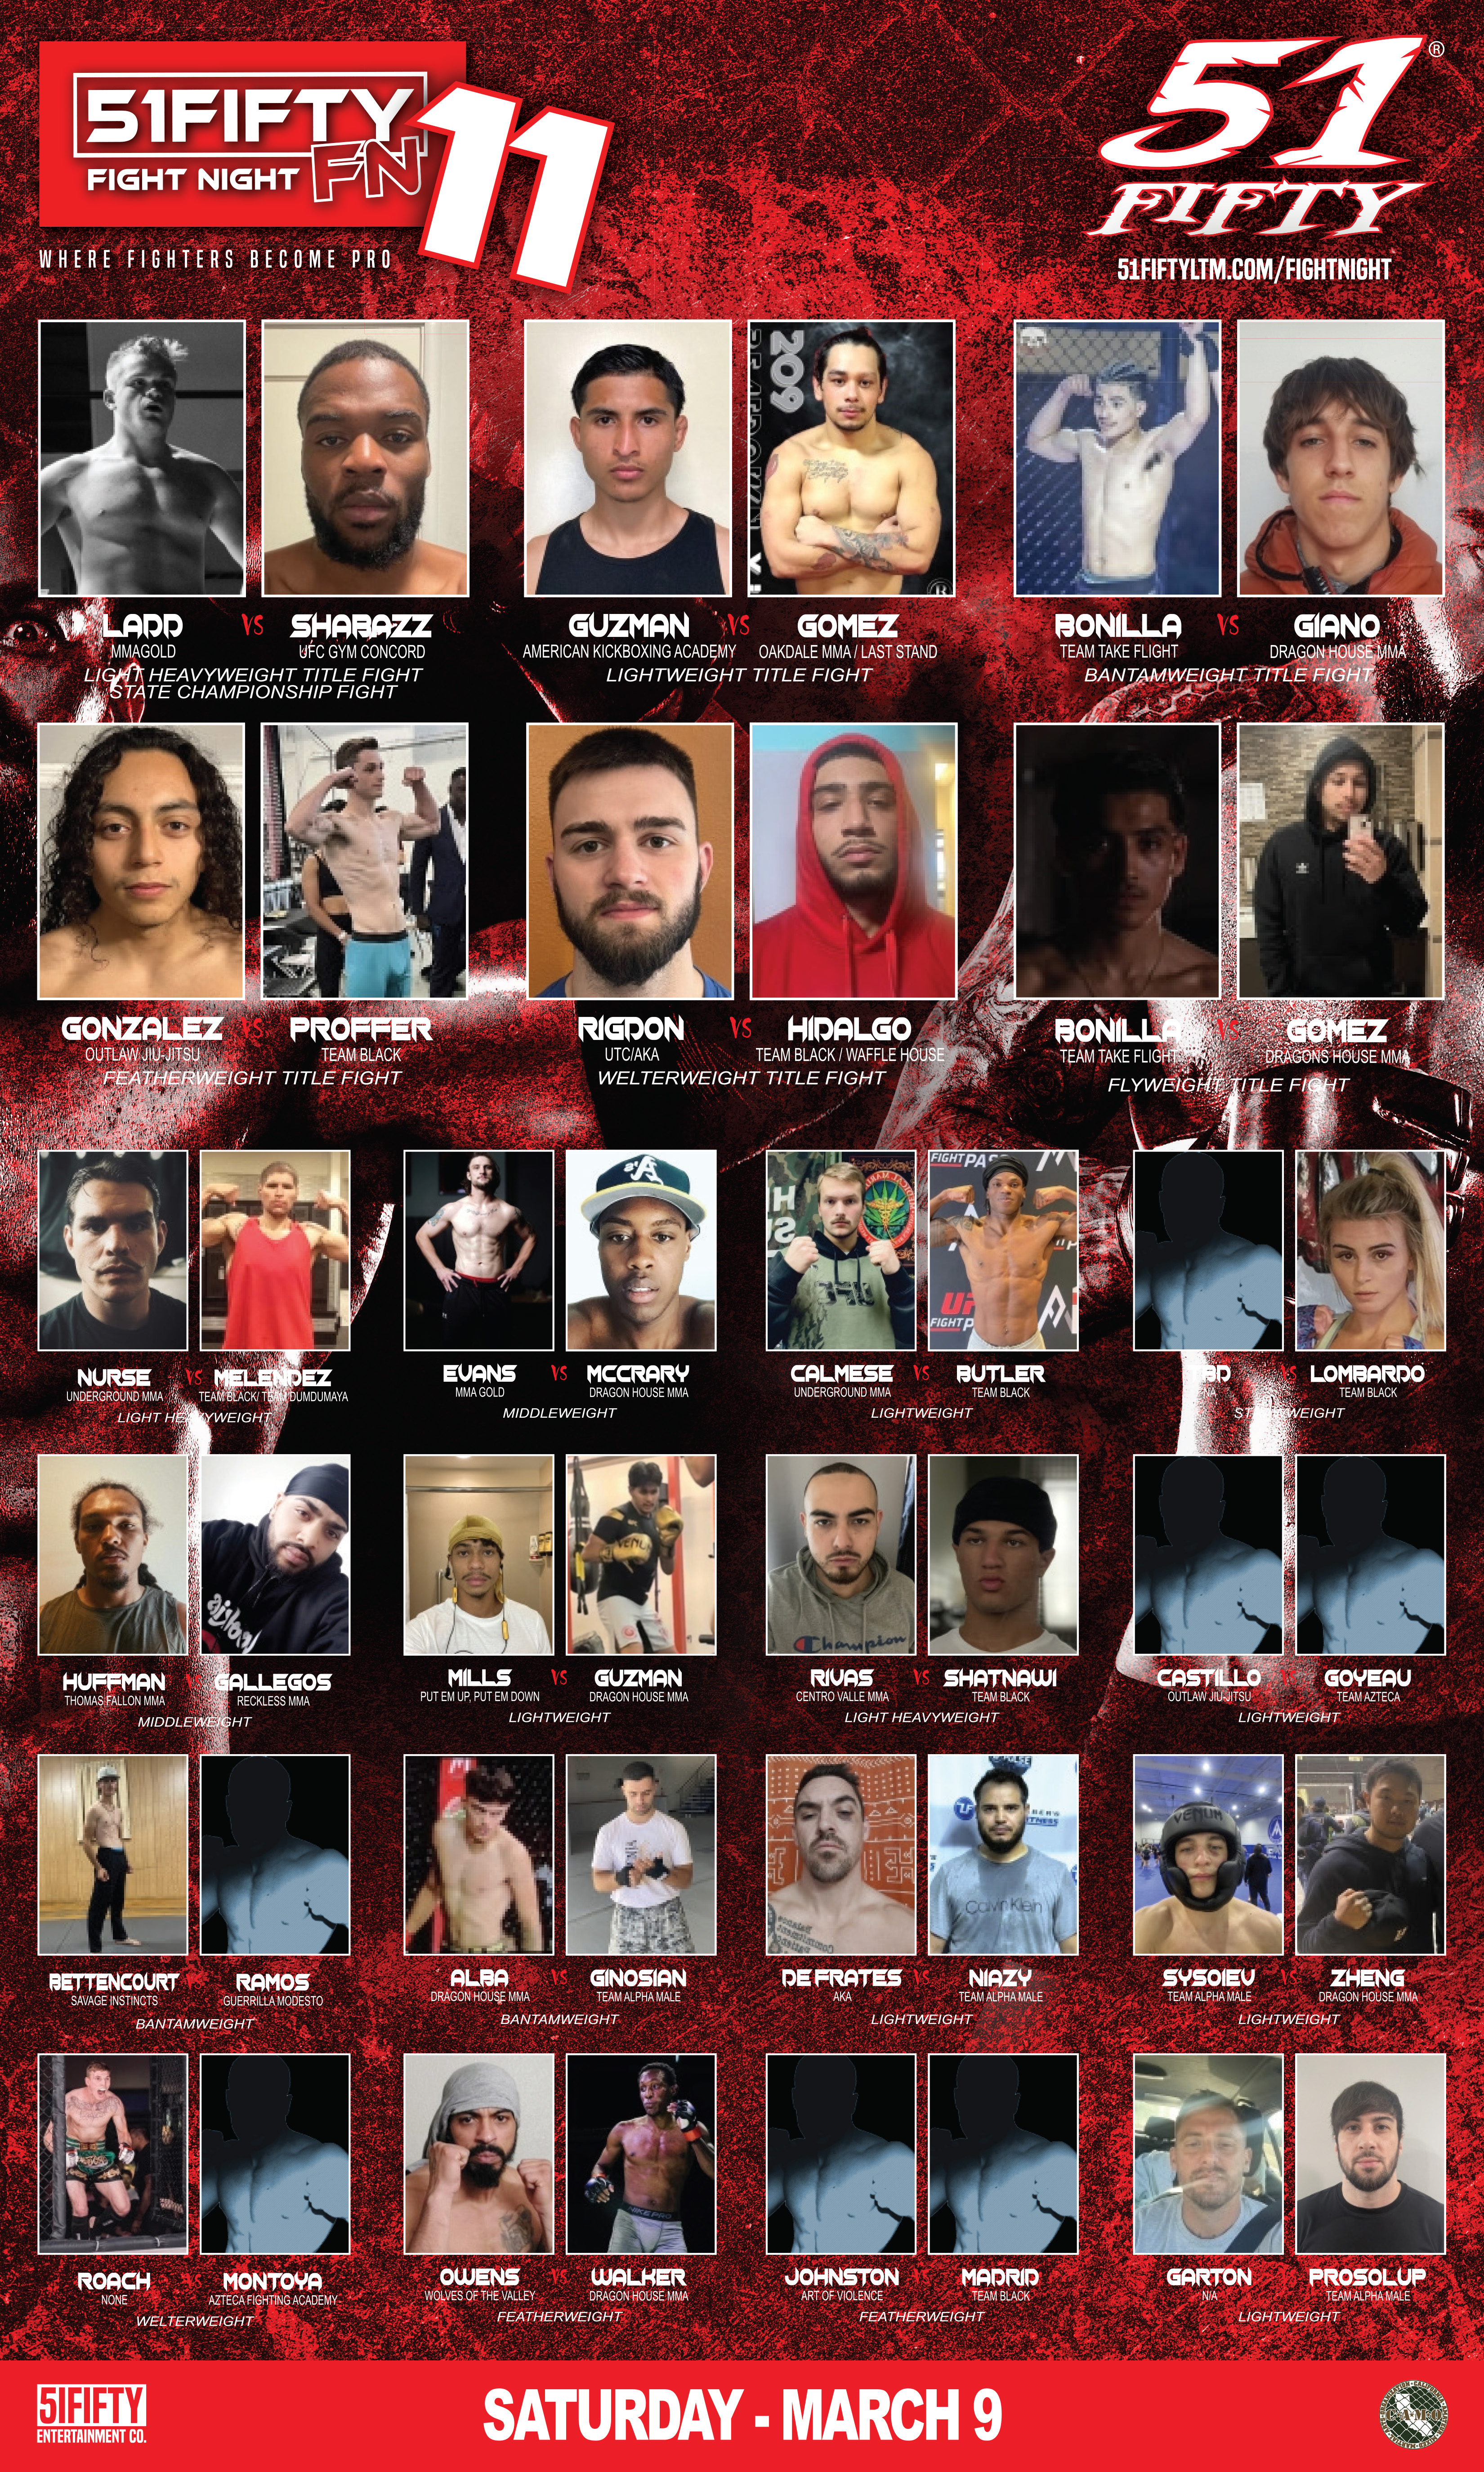 51FIFTY Fight Night - Fight Card